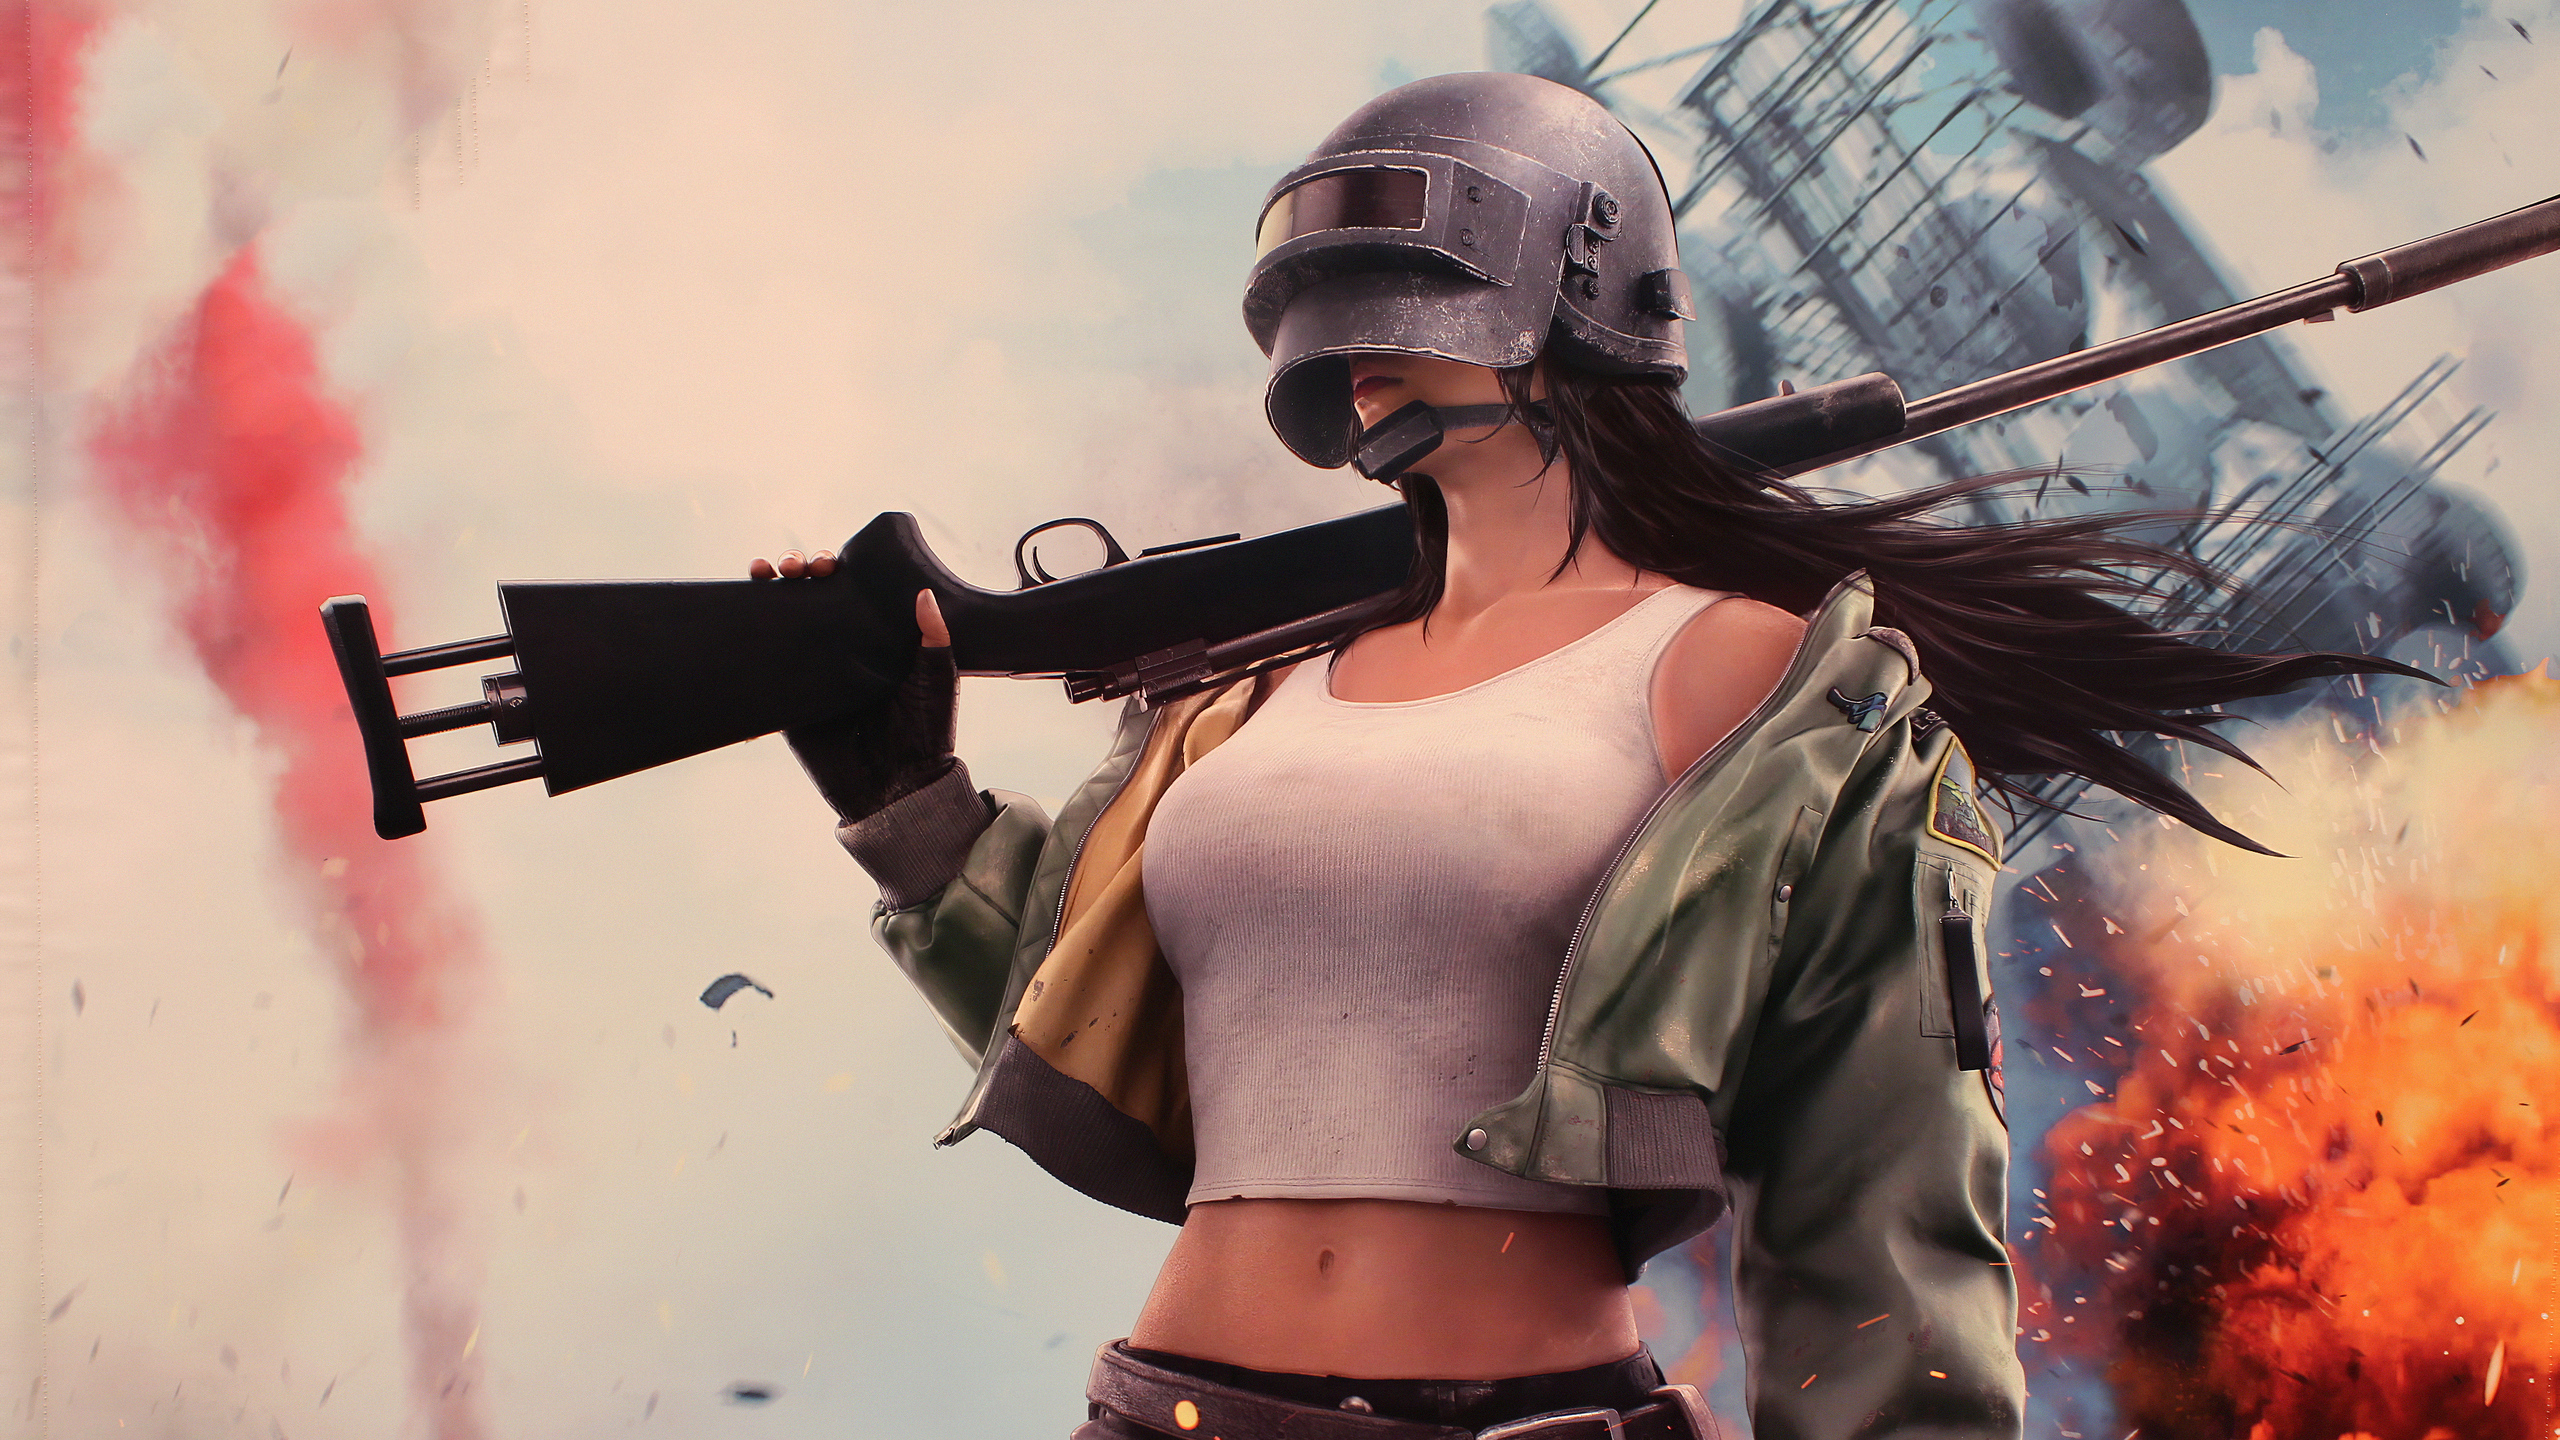 2560x1440 Pubg Helmet Girl 4k 1440P Resolution HD 4k Wallpapers, Images,  Backgrounds, Photos and Pictures